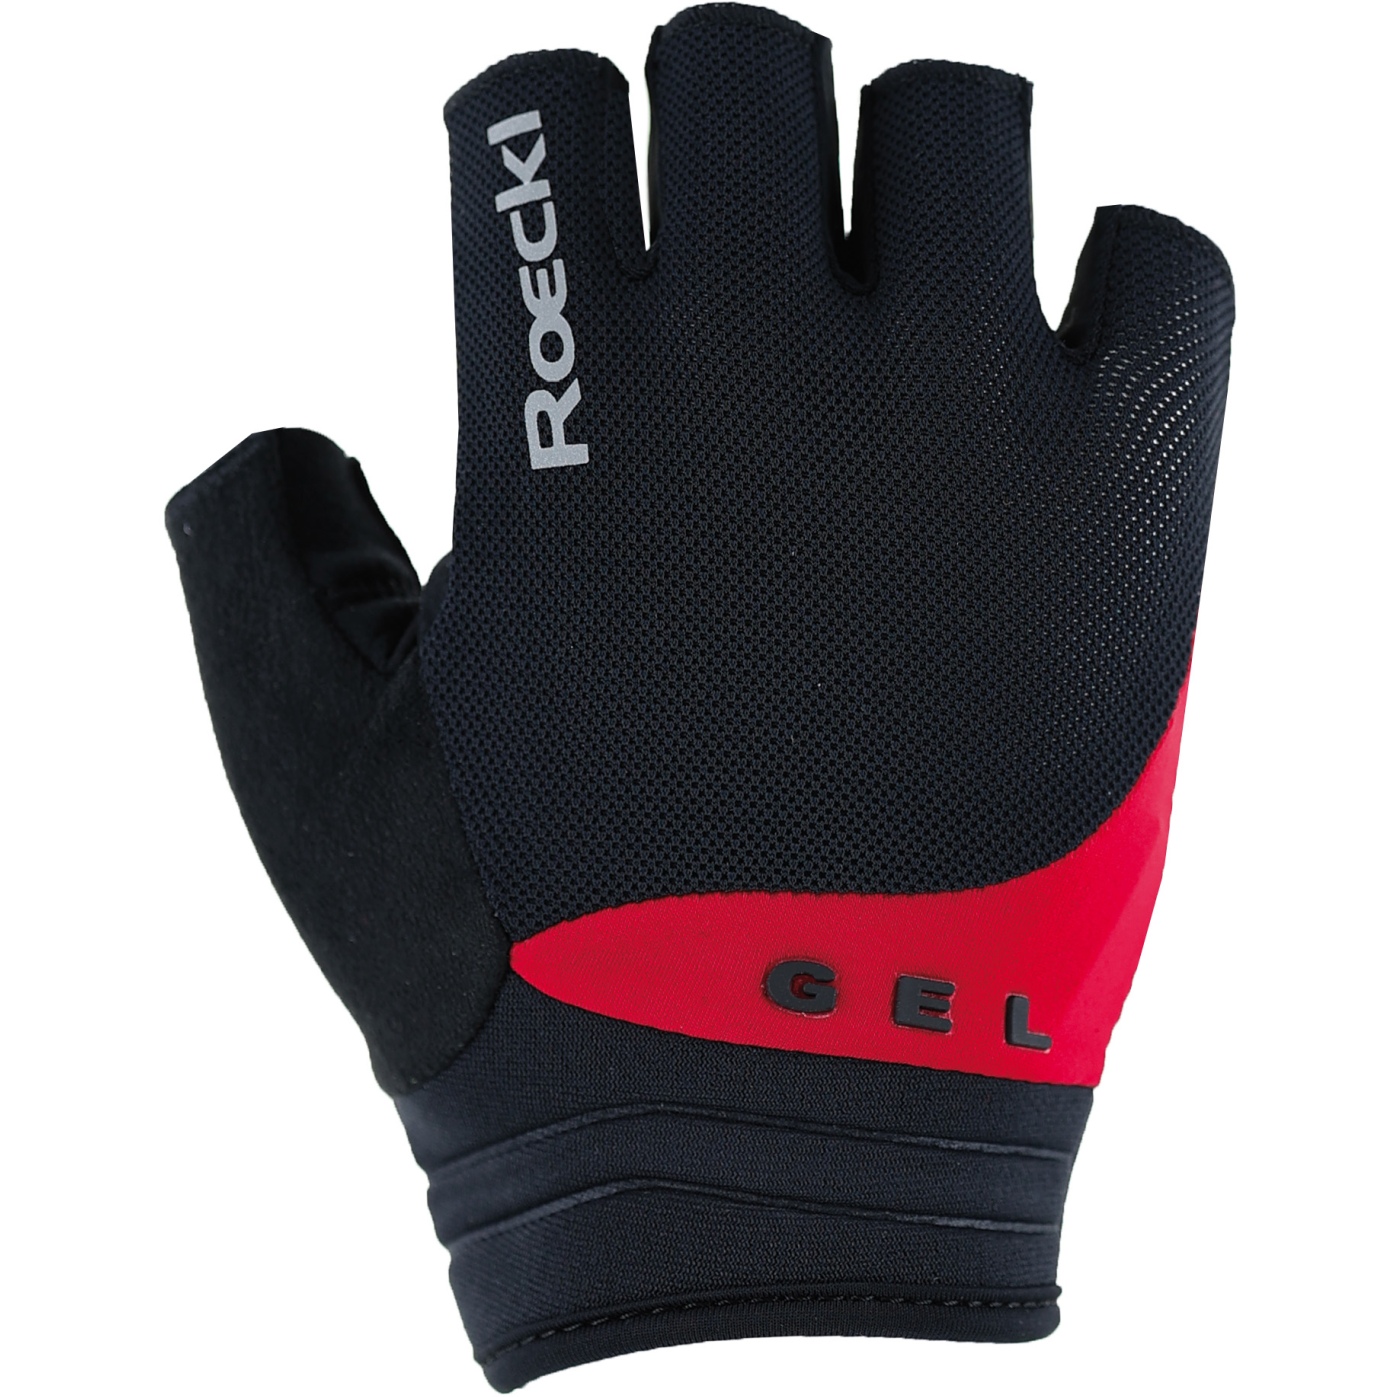 Image of Roeckl Sports Itamos 2 Cycling Gloves - black/red 9300